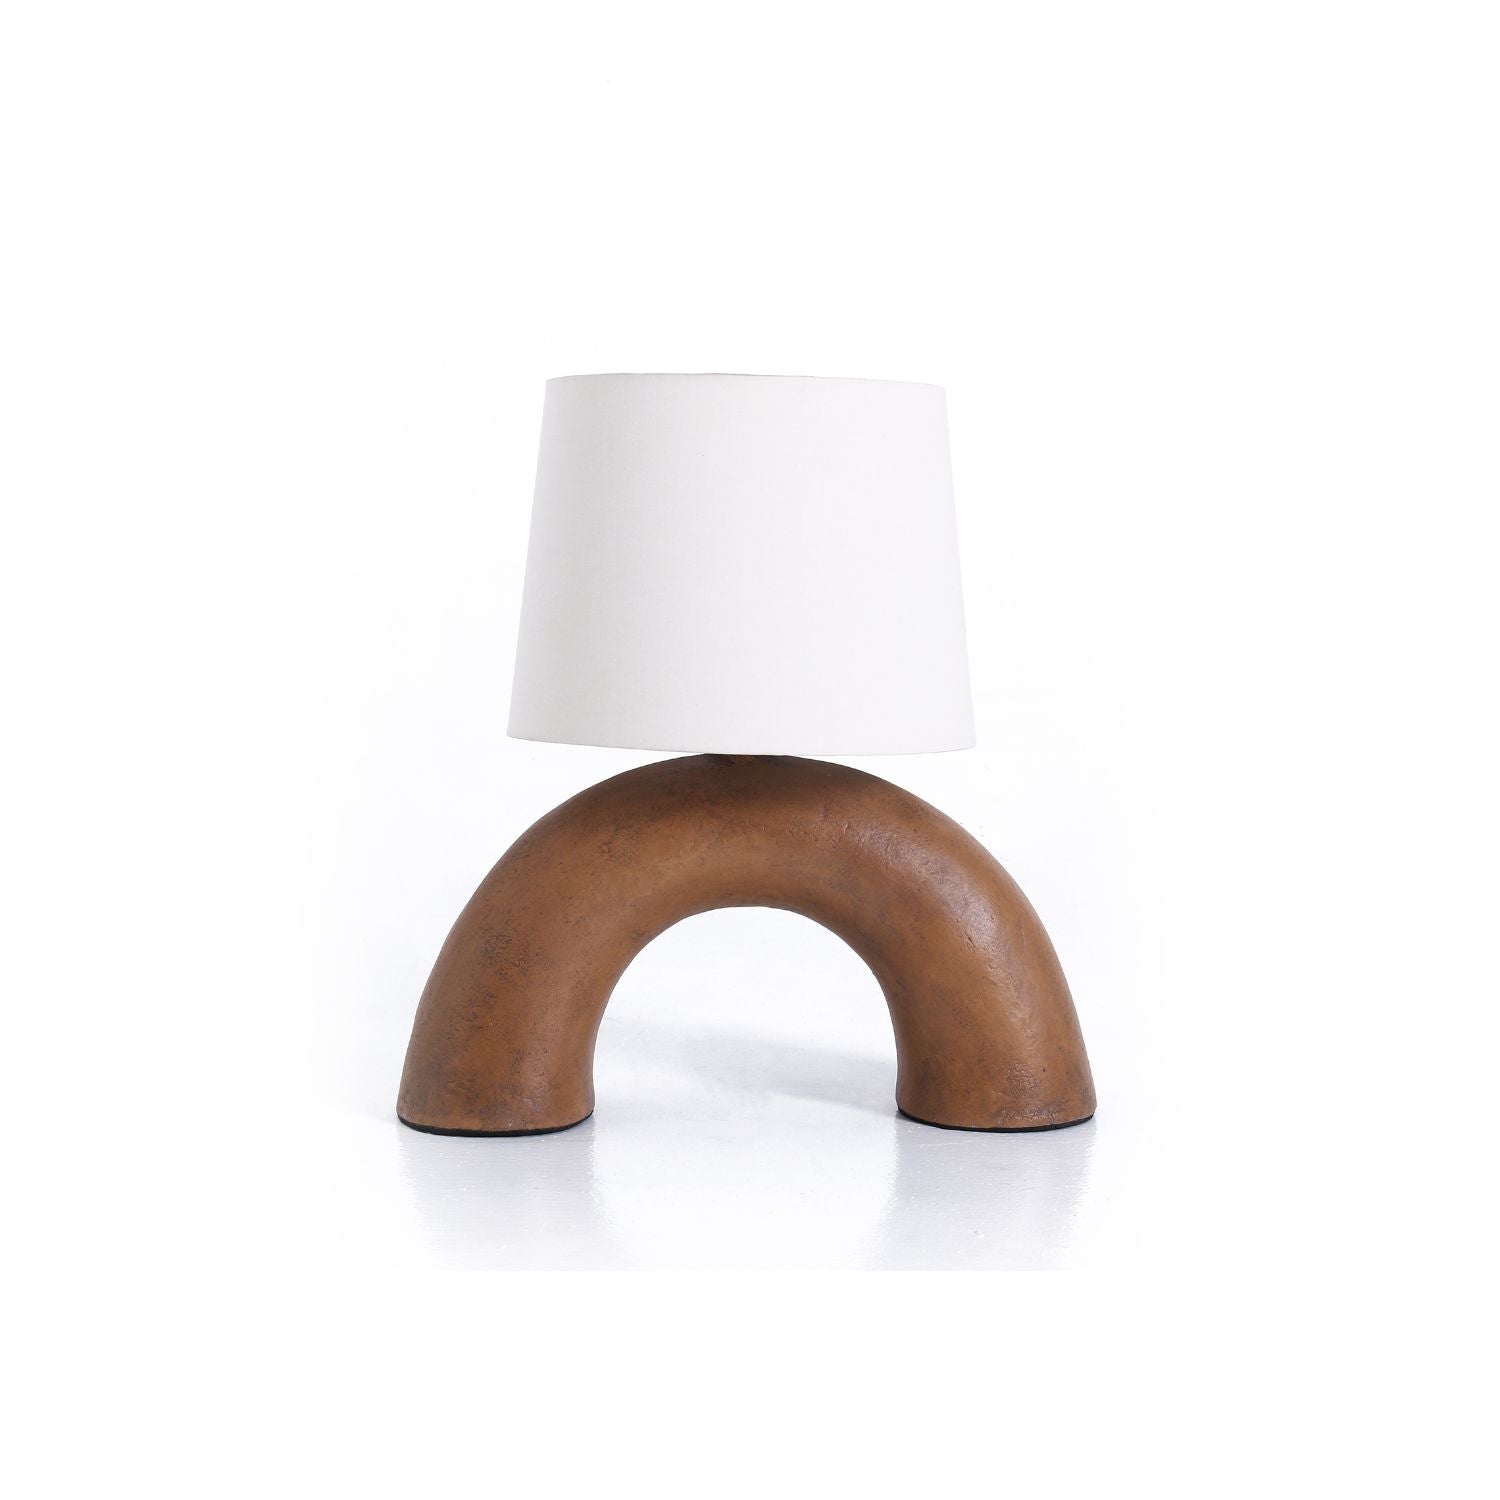 Arch Lamp - Valyou 